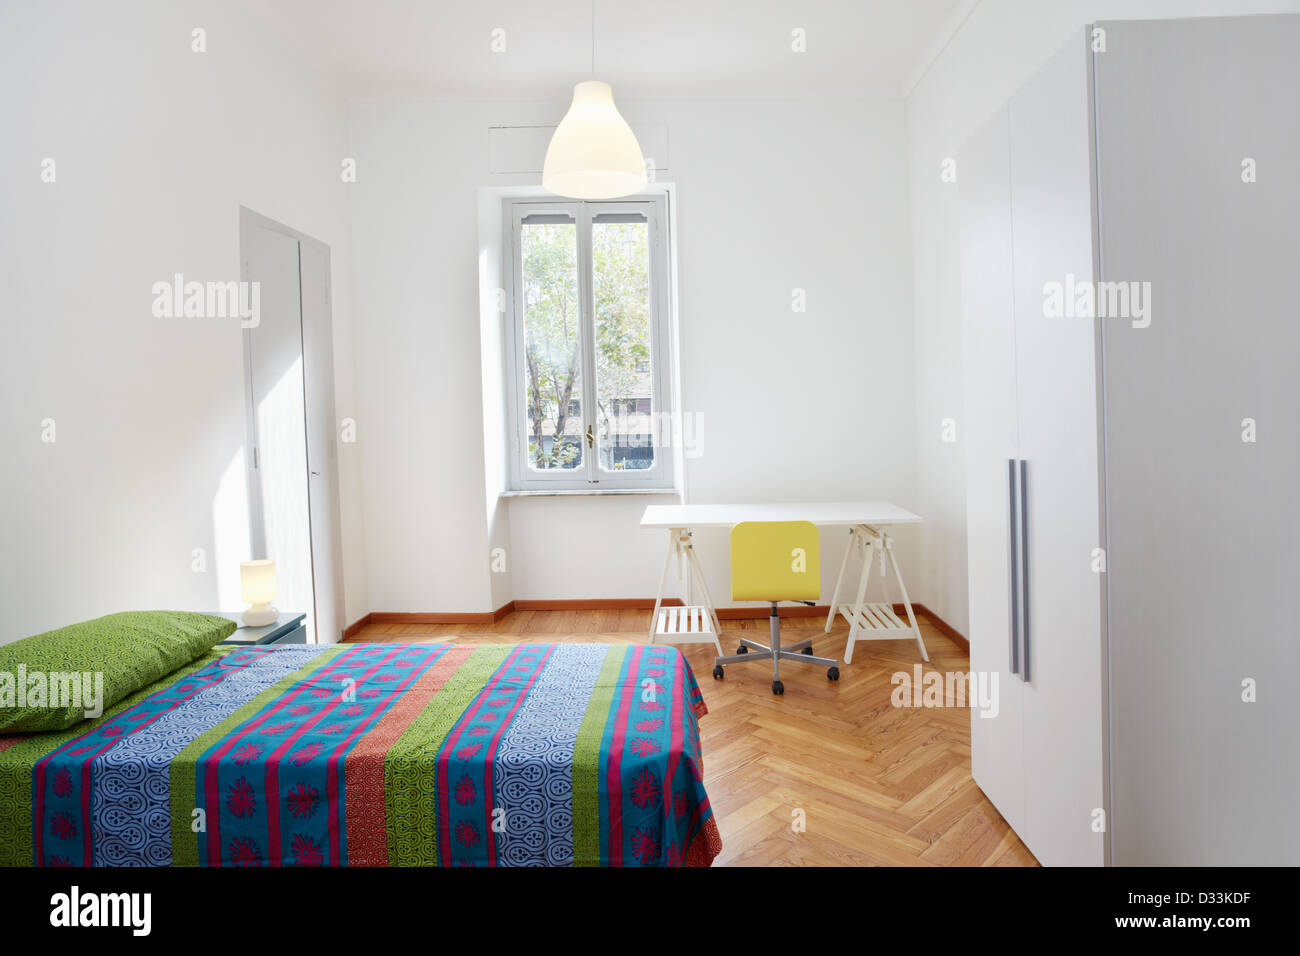 Bedroom in new modern apartment Stock Photo